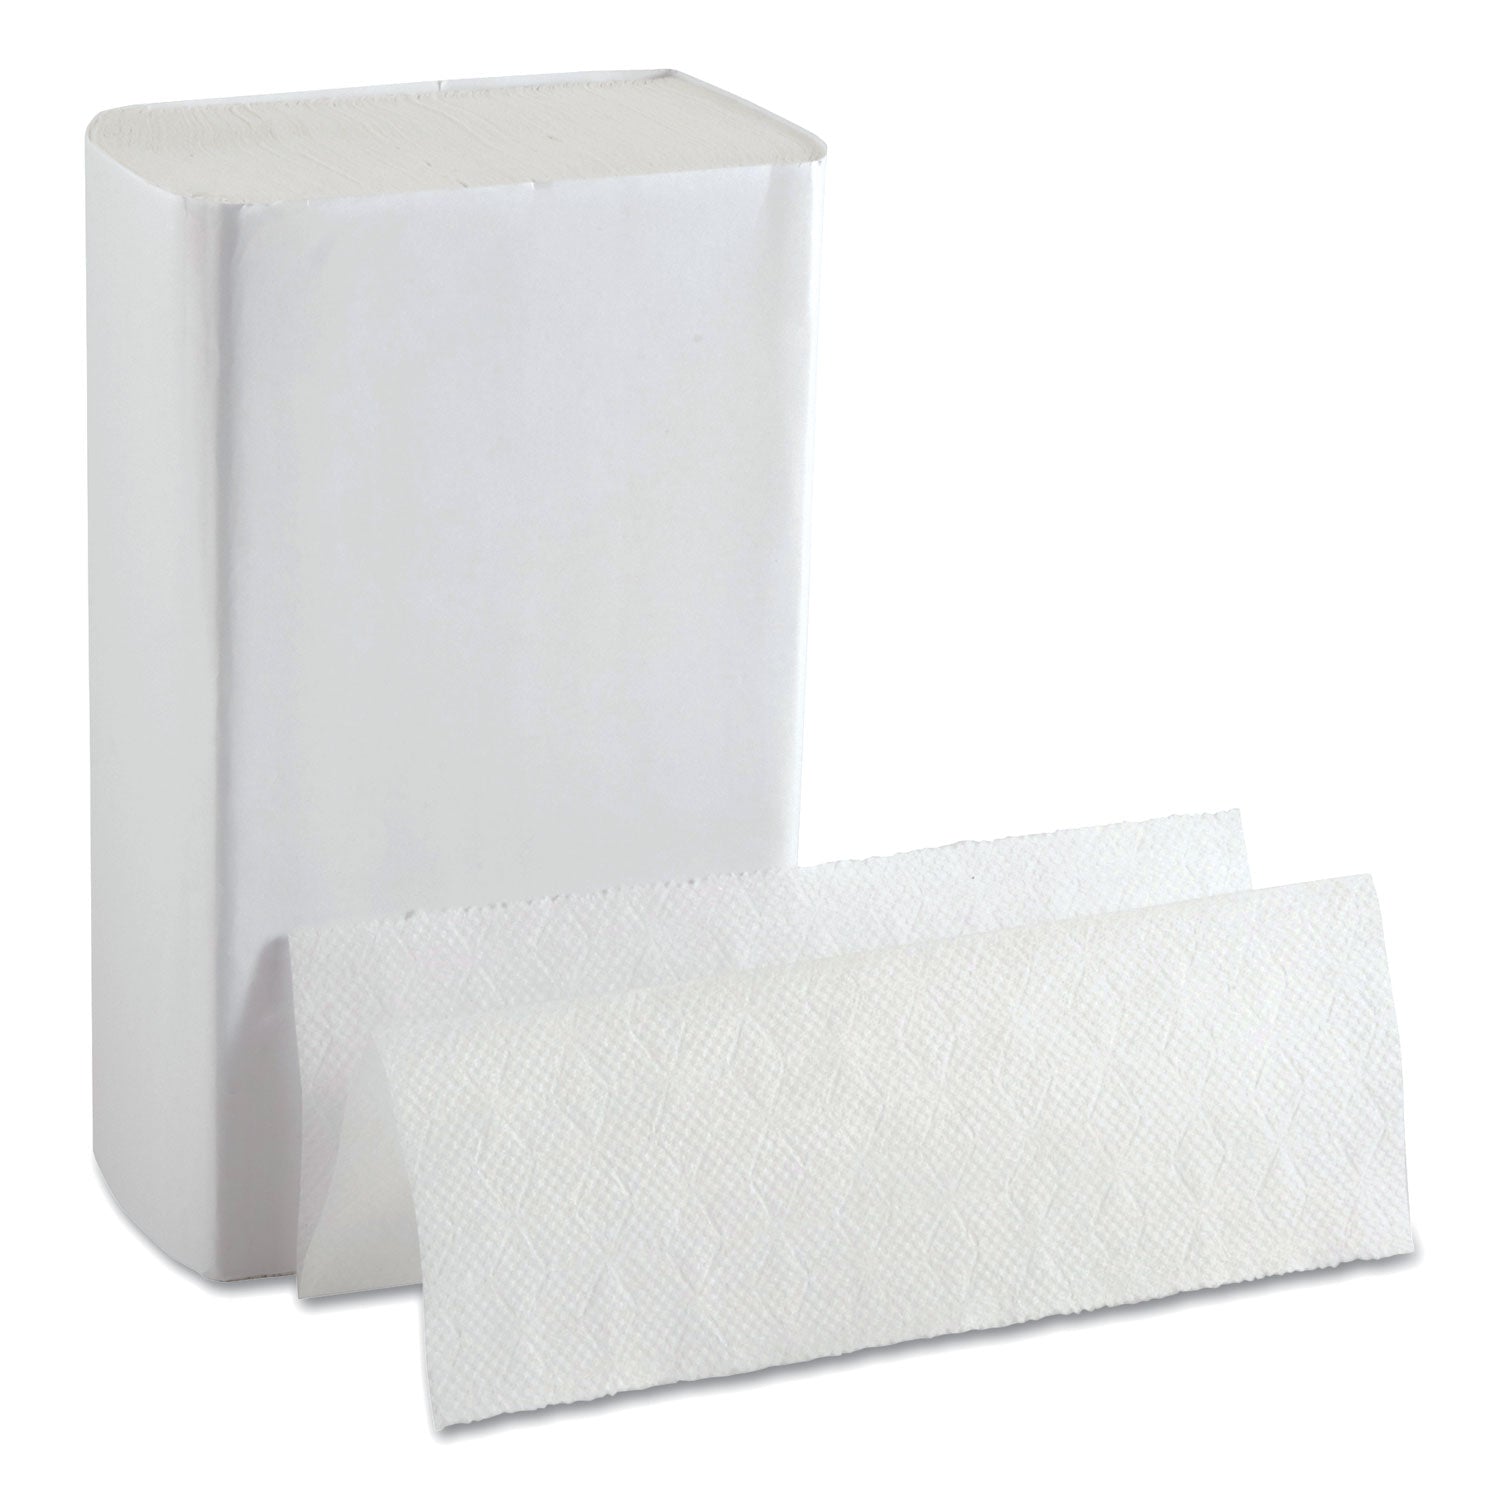 Pacific Blue Ultra Paper Towels, 1-Ply, 10.2 x 10.8, White, 220/Pack, 10 Packs/Carton - 